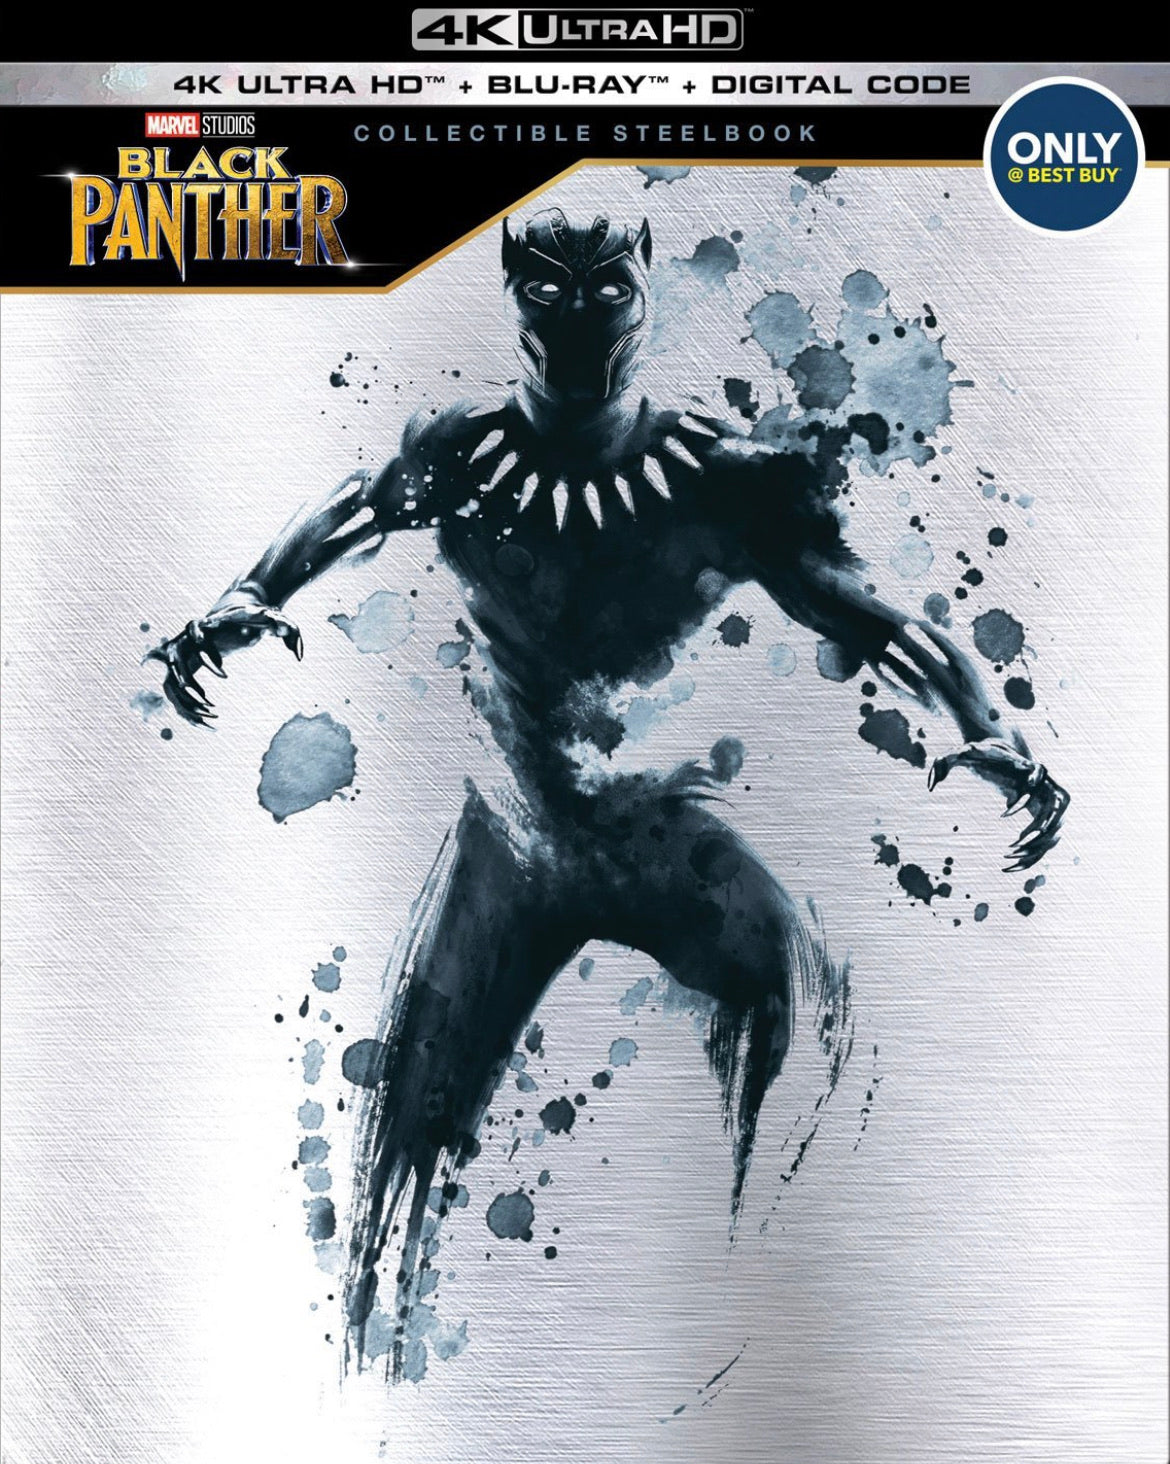 Black Panther (2018) Vudu or Movies Anywhere 4K redemption only